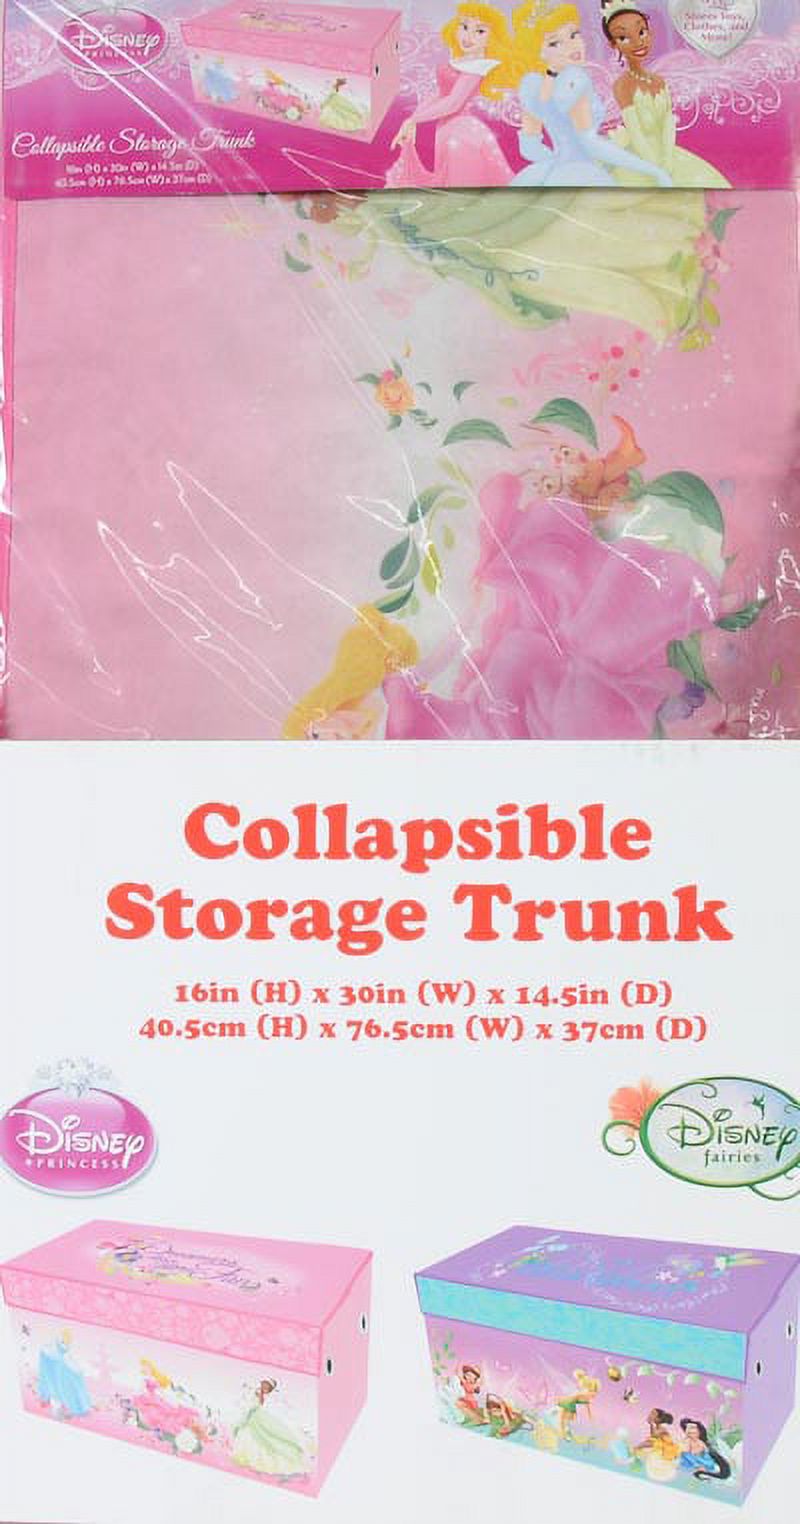 Disney Princess Oversized Soft Pink Canvas Collapsible Storage Toy Trunk for Kids - image 2 of 5